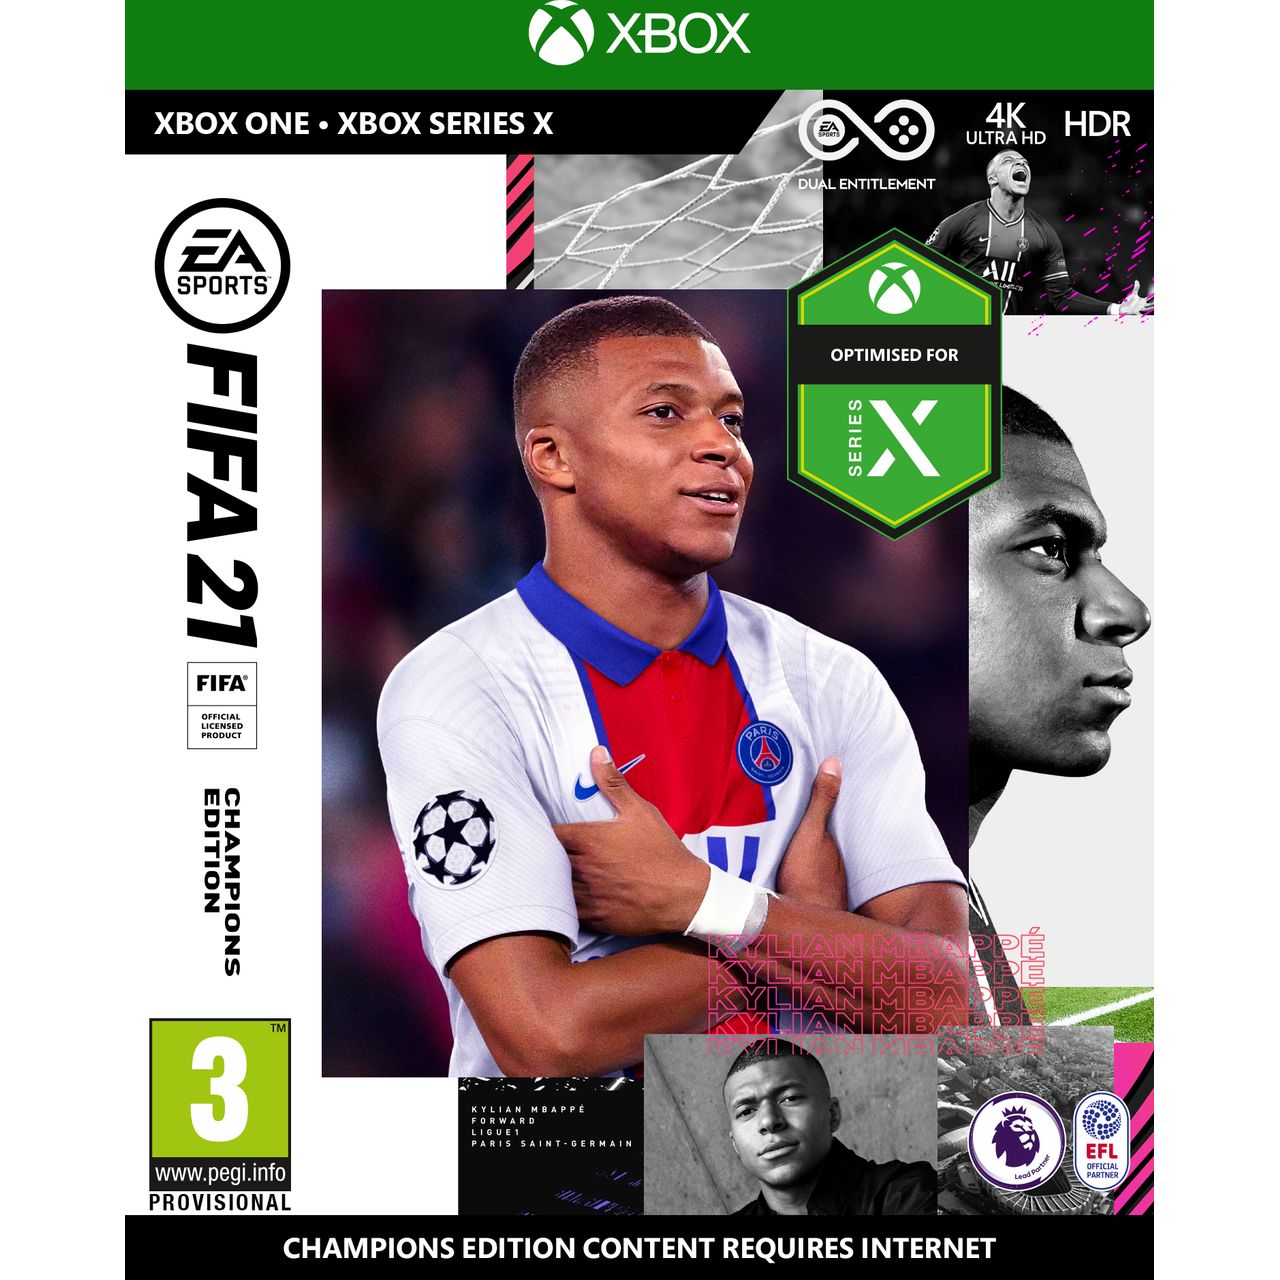 FIFA 21 Champions Edition for Xbox One [Enhanced for Xbox One X] Review